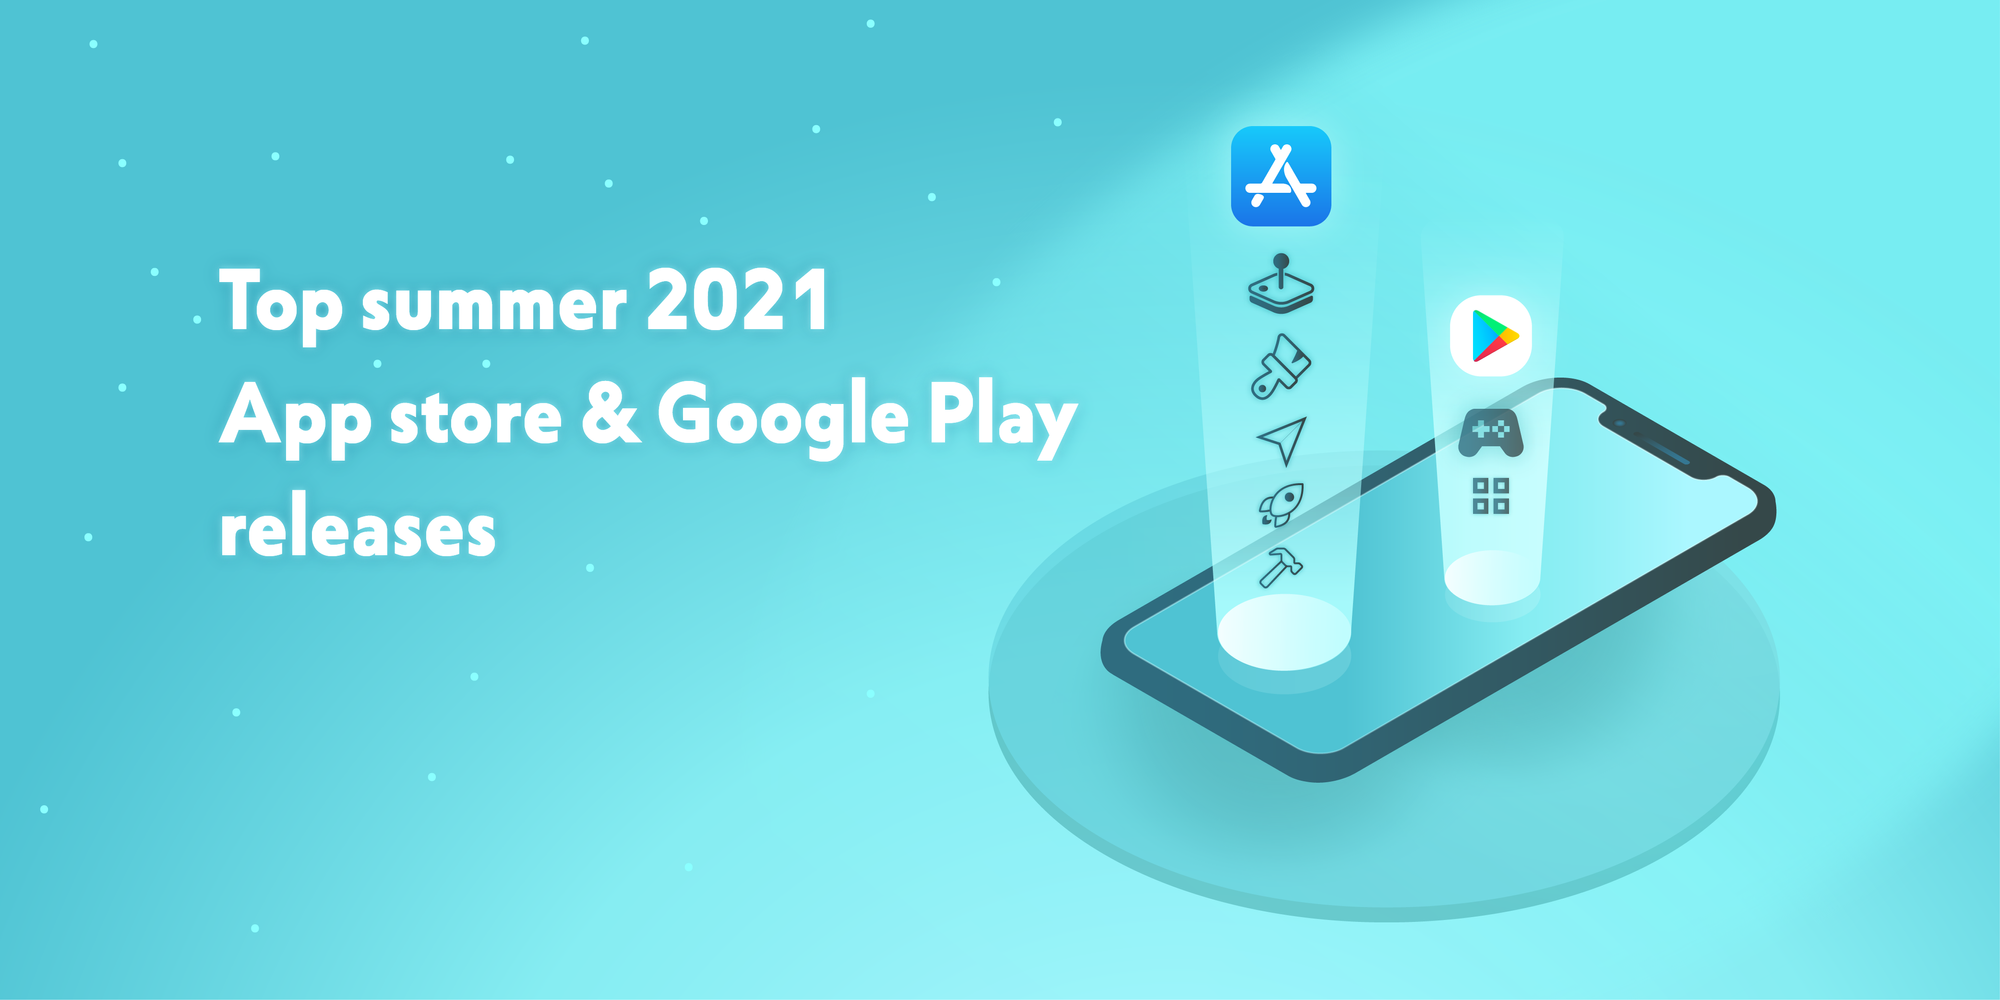 Top summer 2021 App Store & Google Play releases